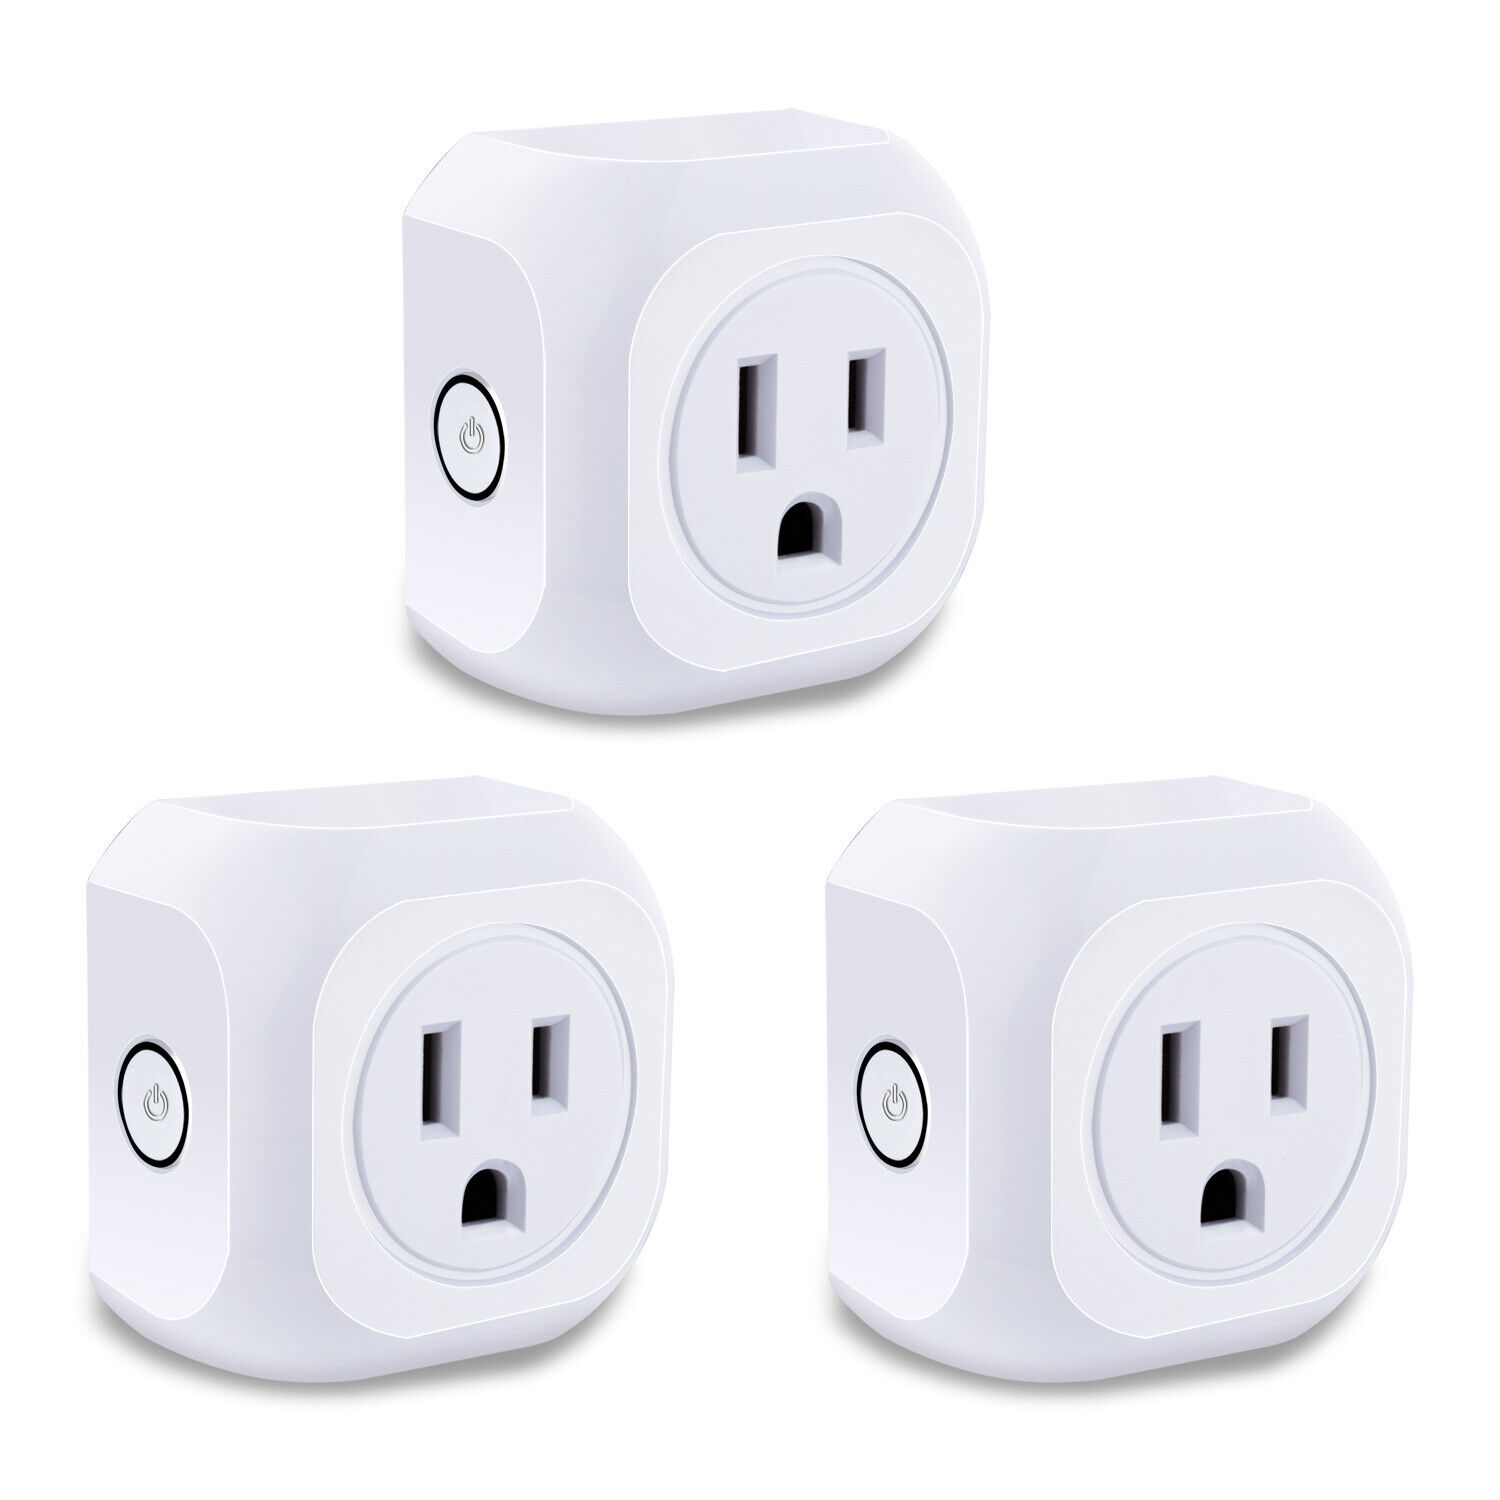 3Pack Smart WiFi Plug Switch Remote Control Timer Power Socket Alexa Google Home Kootion Does not apply